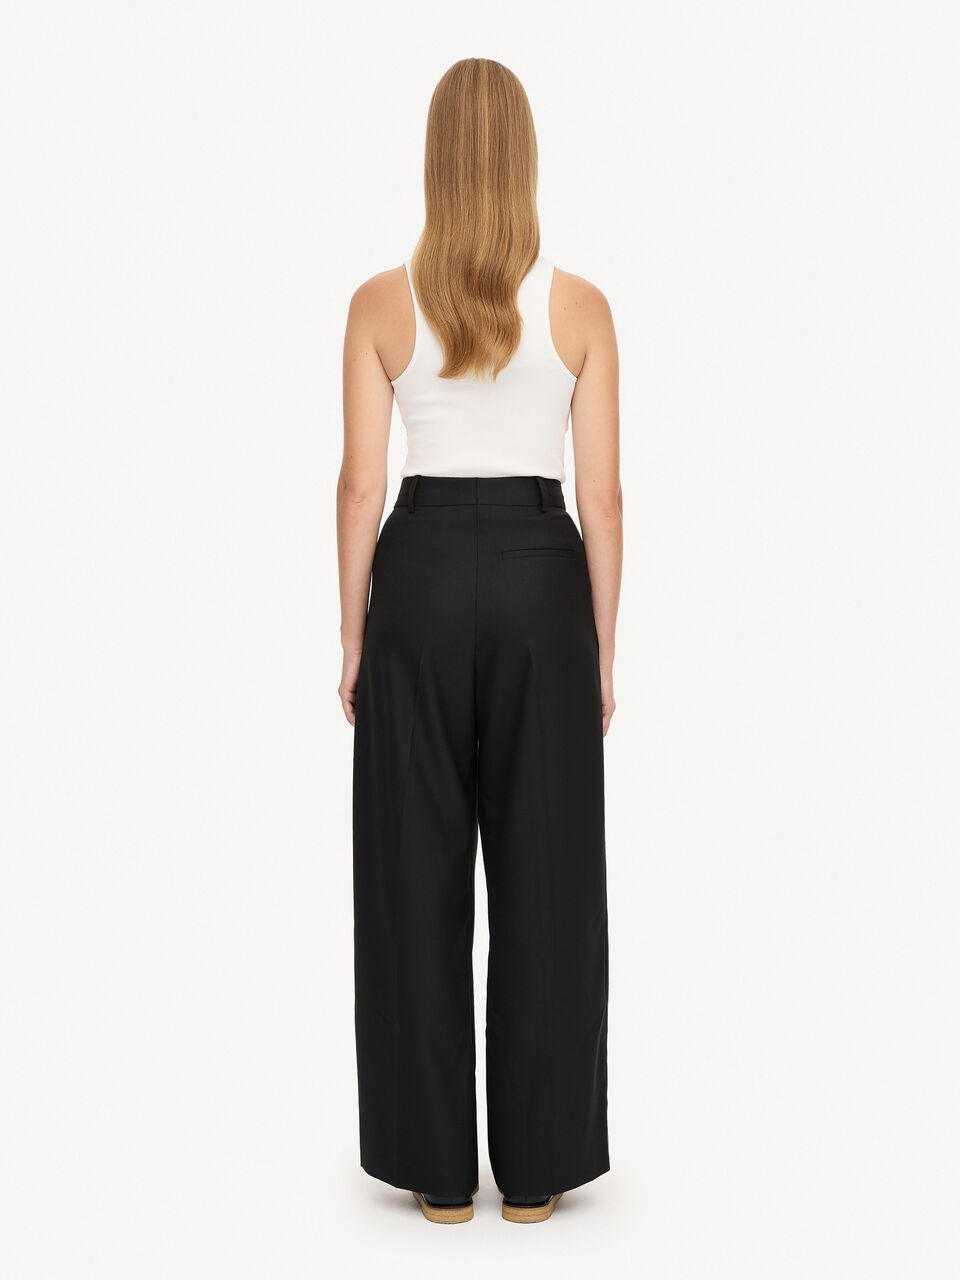 Cymbaria High-Waisted Trousers: Black